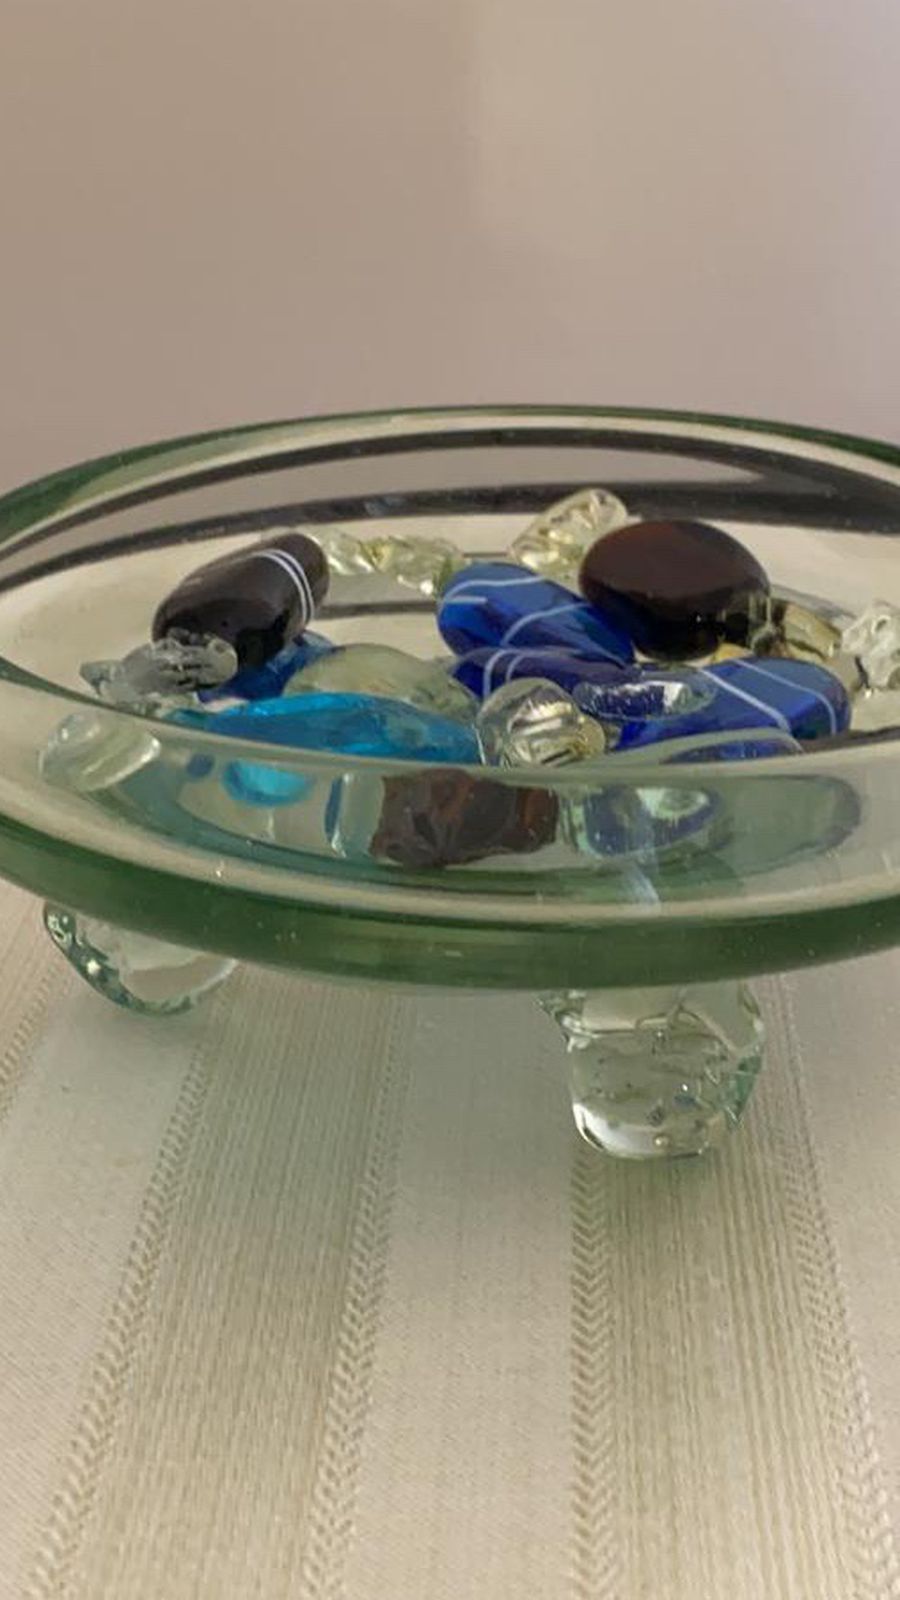 6.5’ pedals dish with glass candies - $7